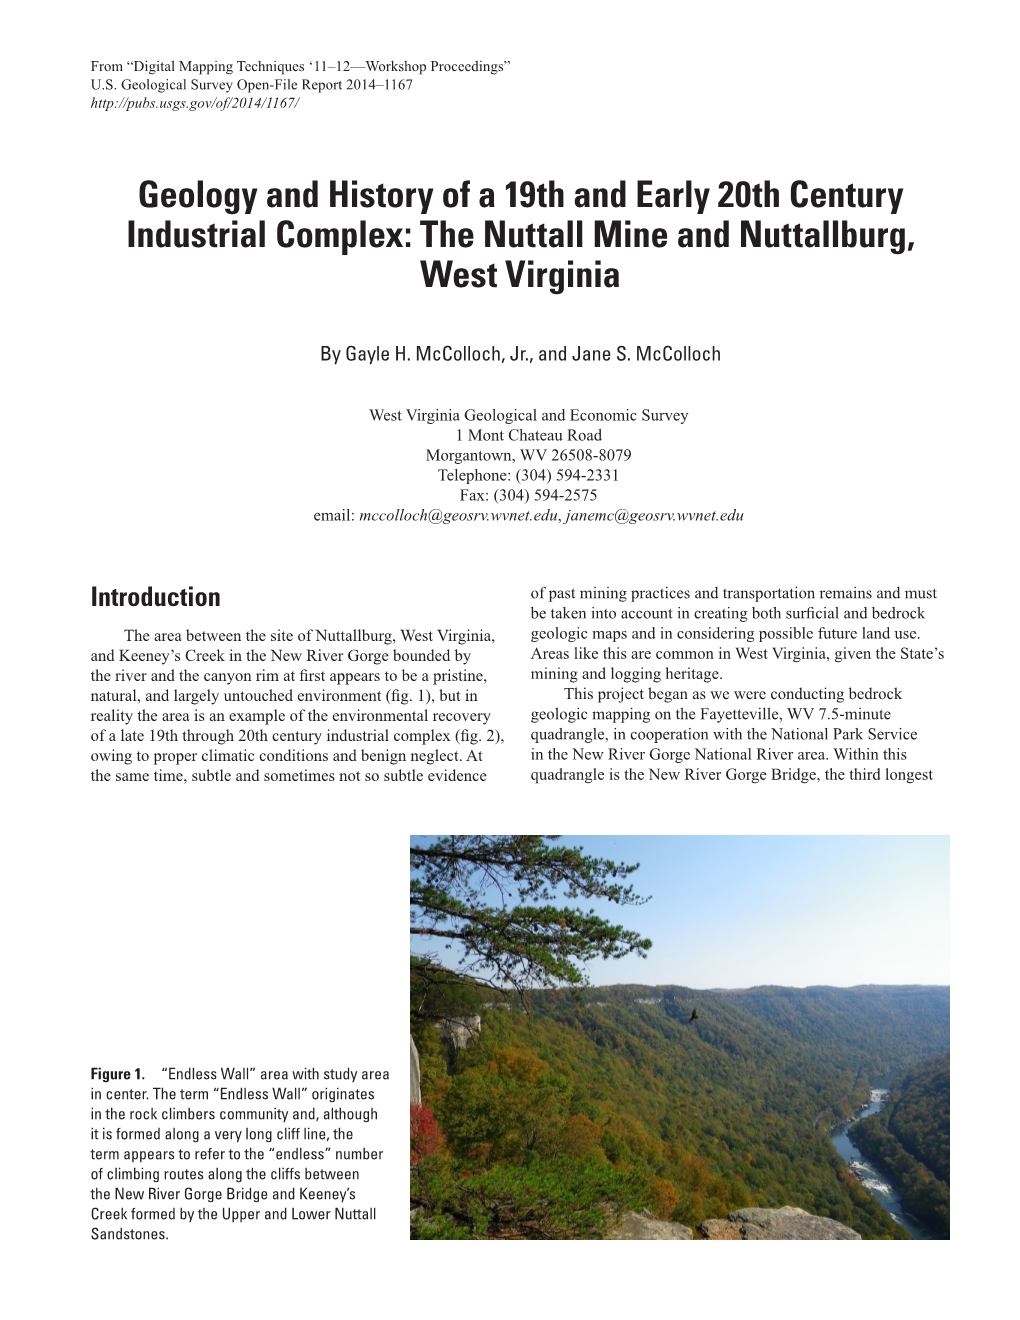 Geology and History of a 19Th and Early 20Th Century Industrial Complex: the Nuttall Mine and Nuttallburg, West Virginia